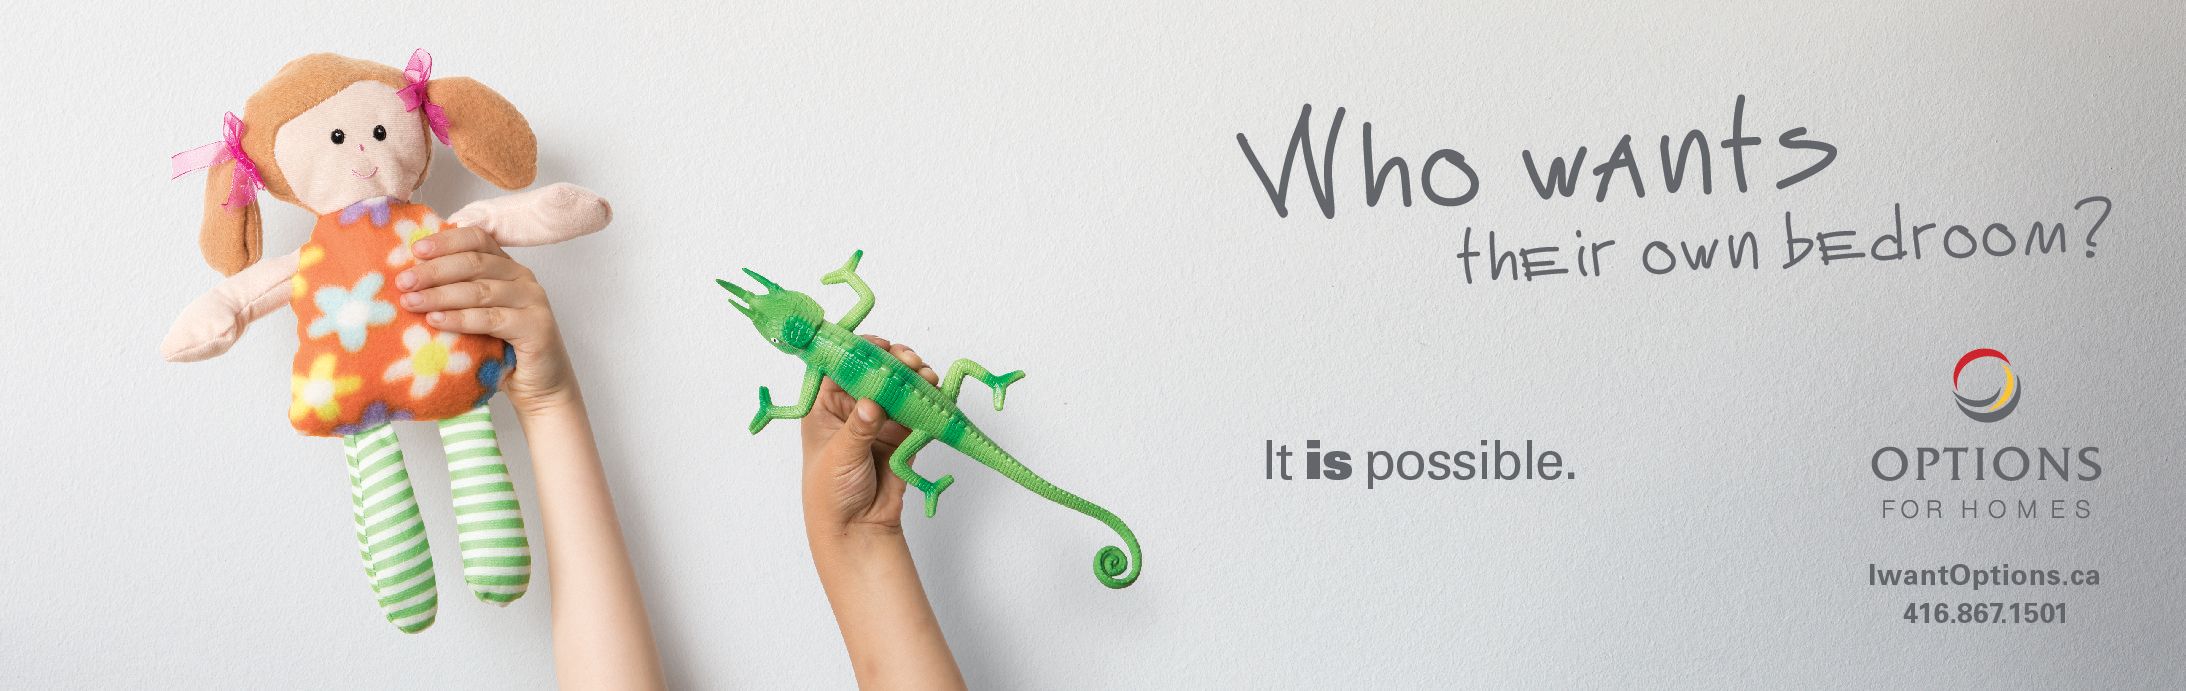 Two kids hands holding a doll and toy lizard against a white background. The the right, the grey capitalize text 